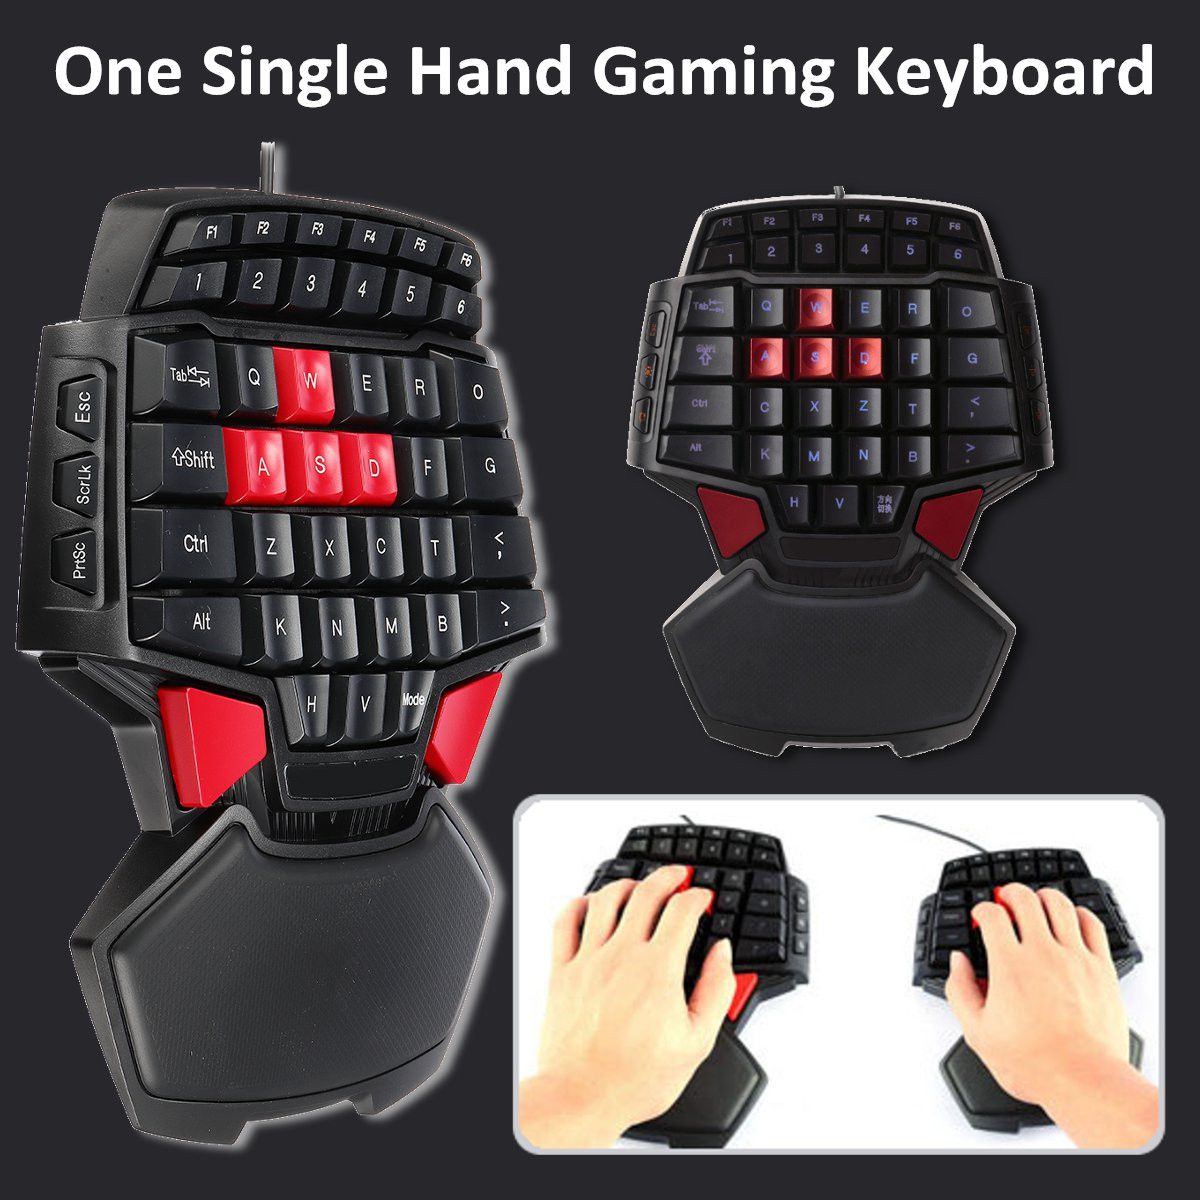 DeLUX-T9-47-Key-USB-Wired-Mini-Single-Hand-Gaming-Keyboard-for-PC-Laptop-1353522